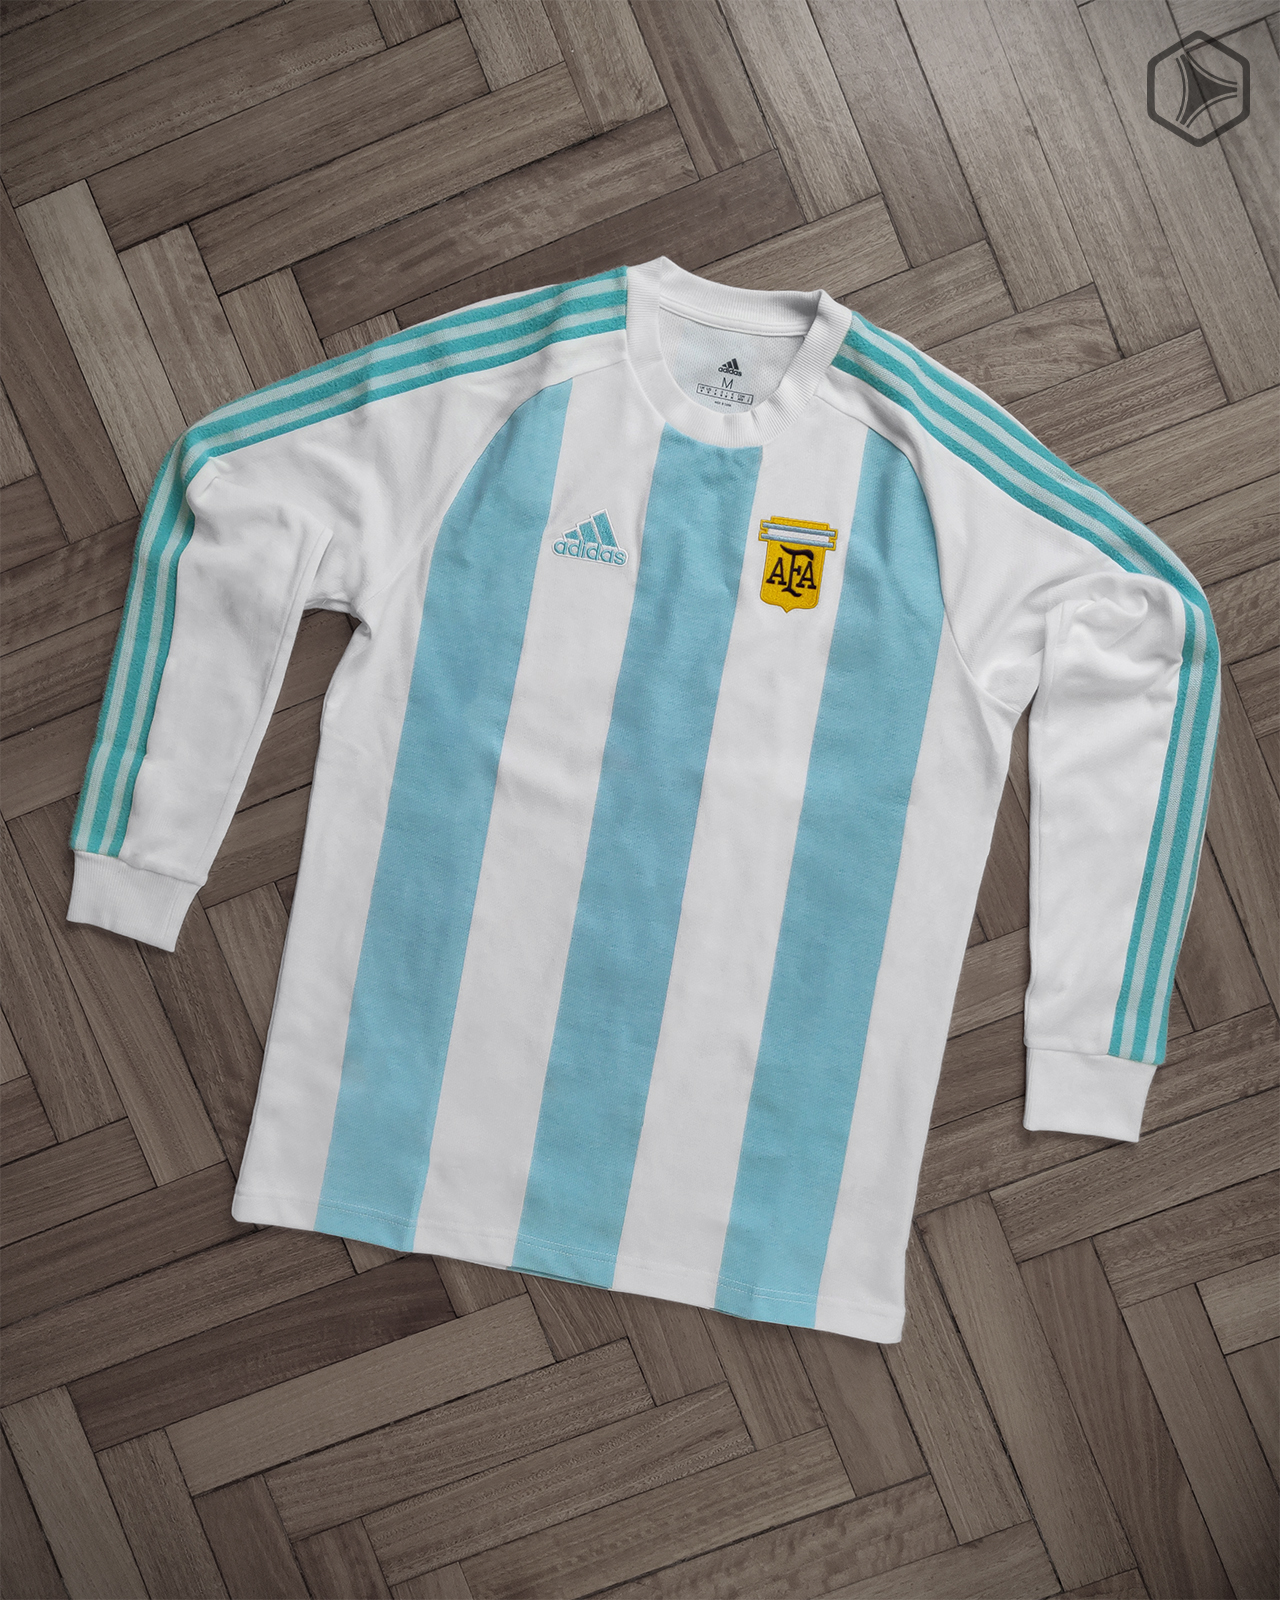 adidas argentina,Save up to 18%,www.ilcascinone.com